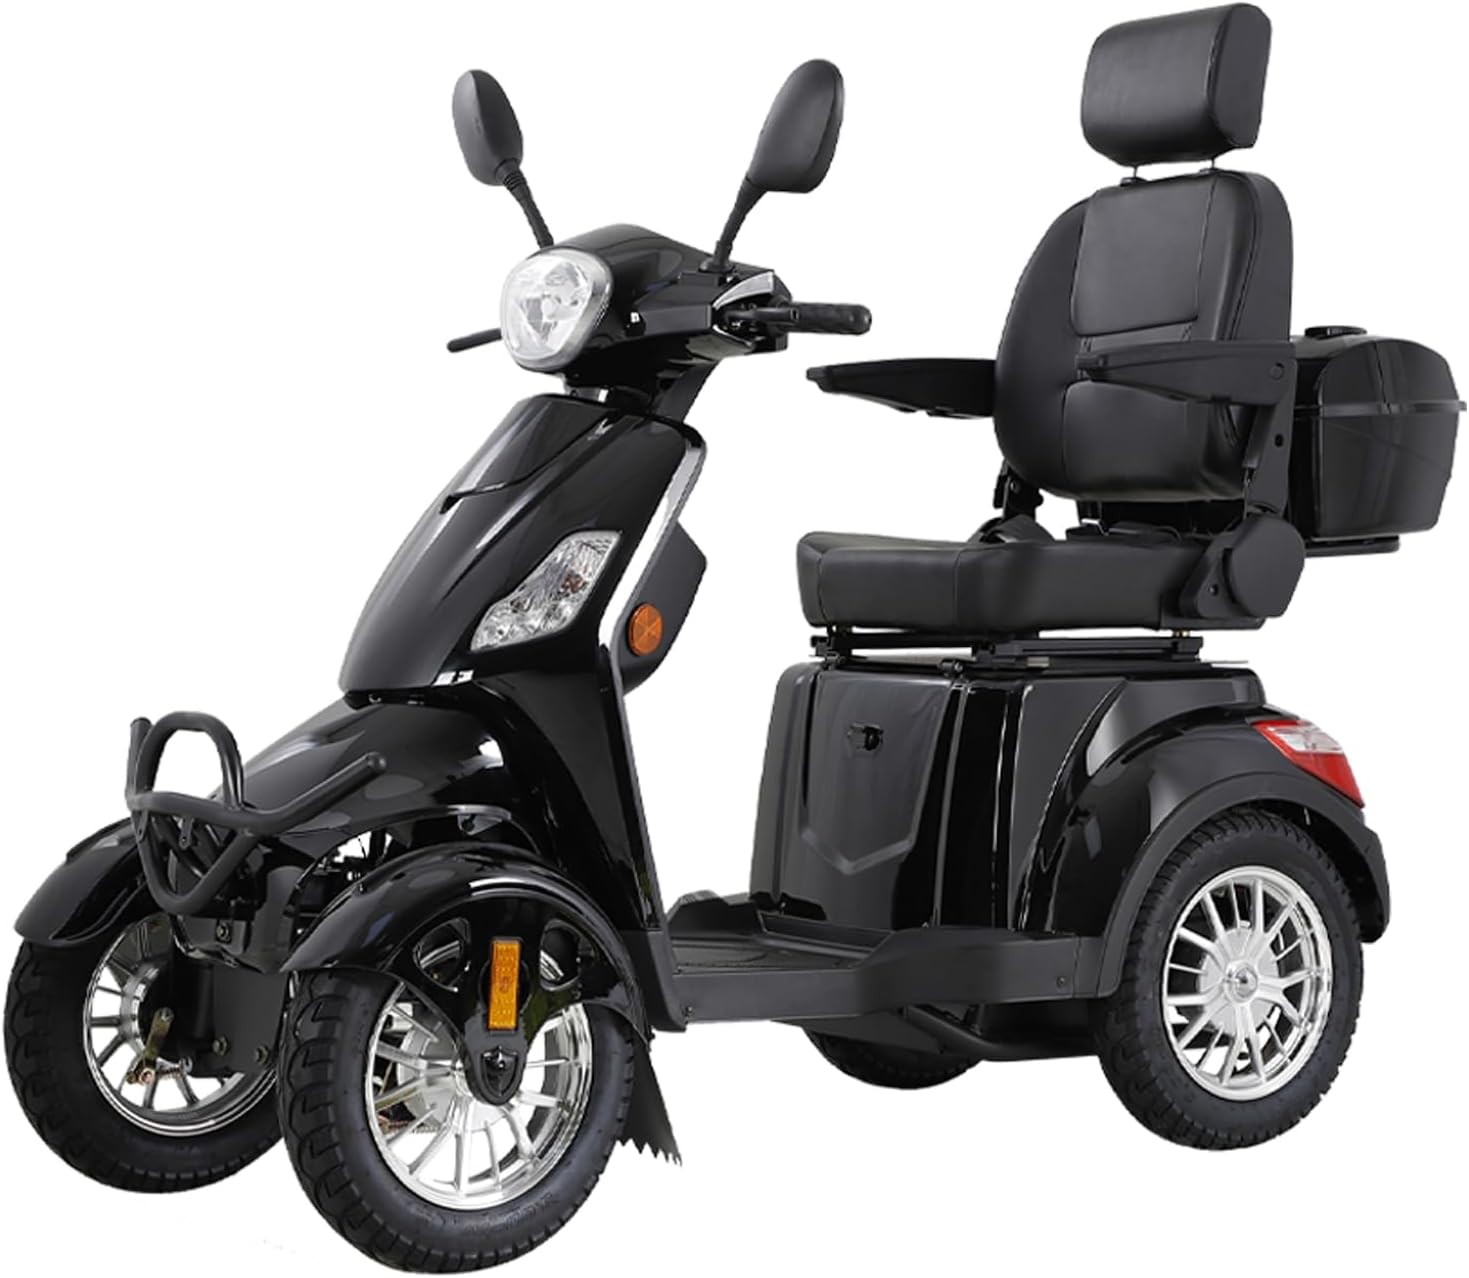 New Arrival PGO Model EEC/COC certificate Disabled scooter safe 500w 1000w convenient to elders